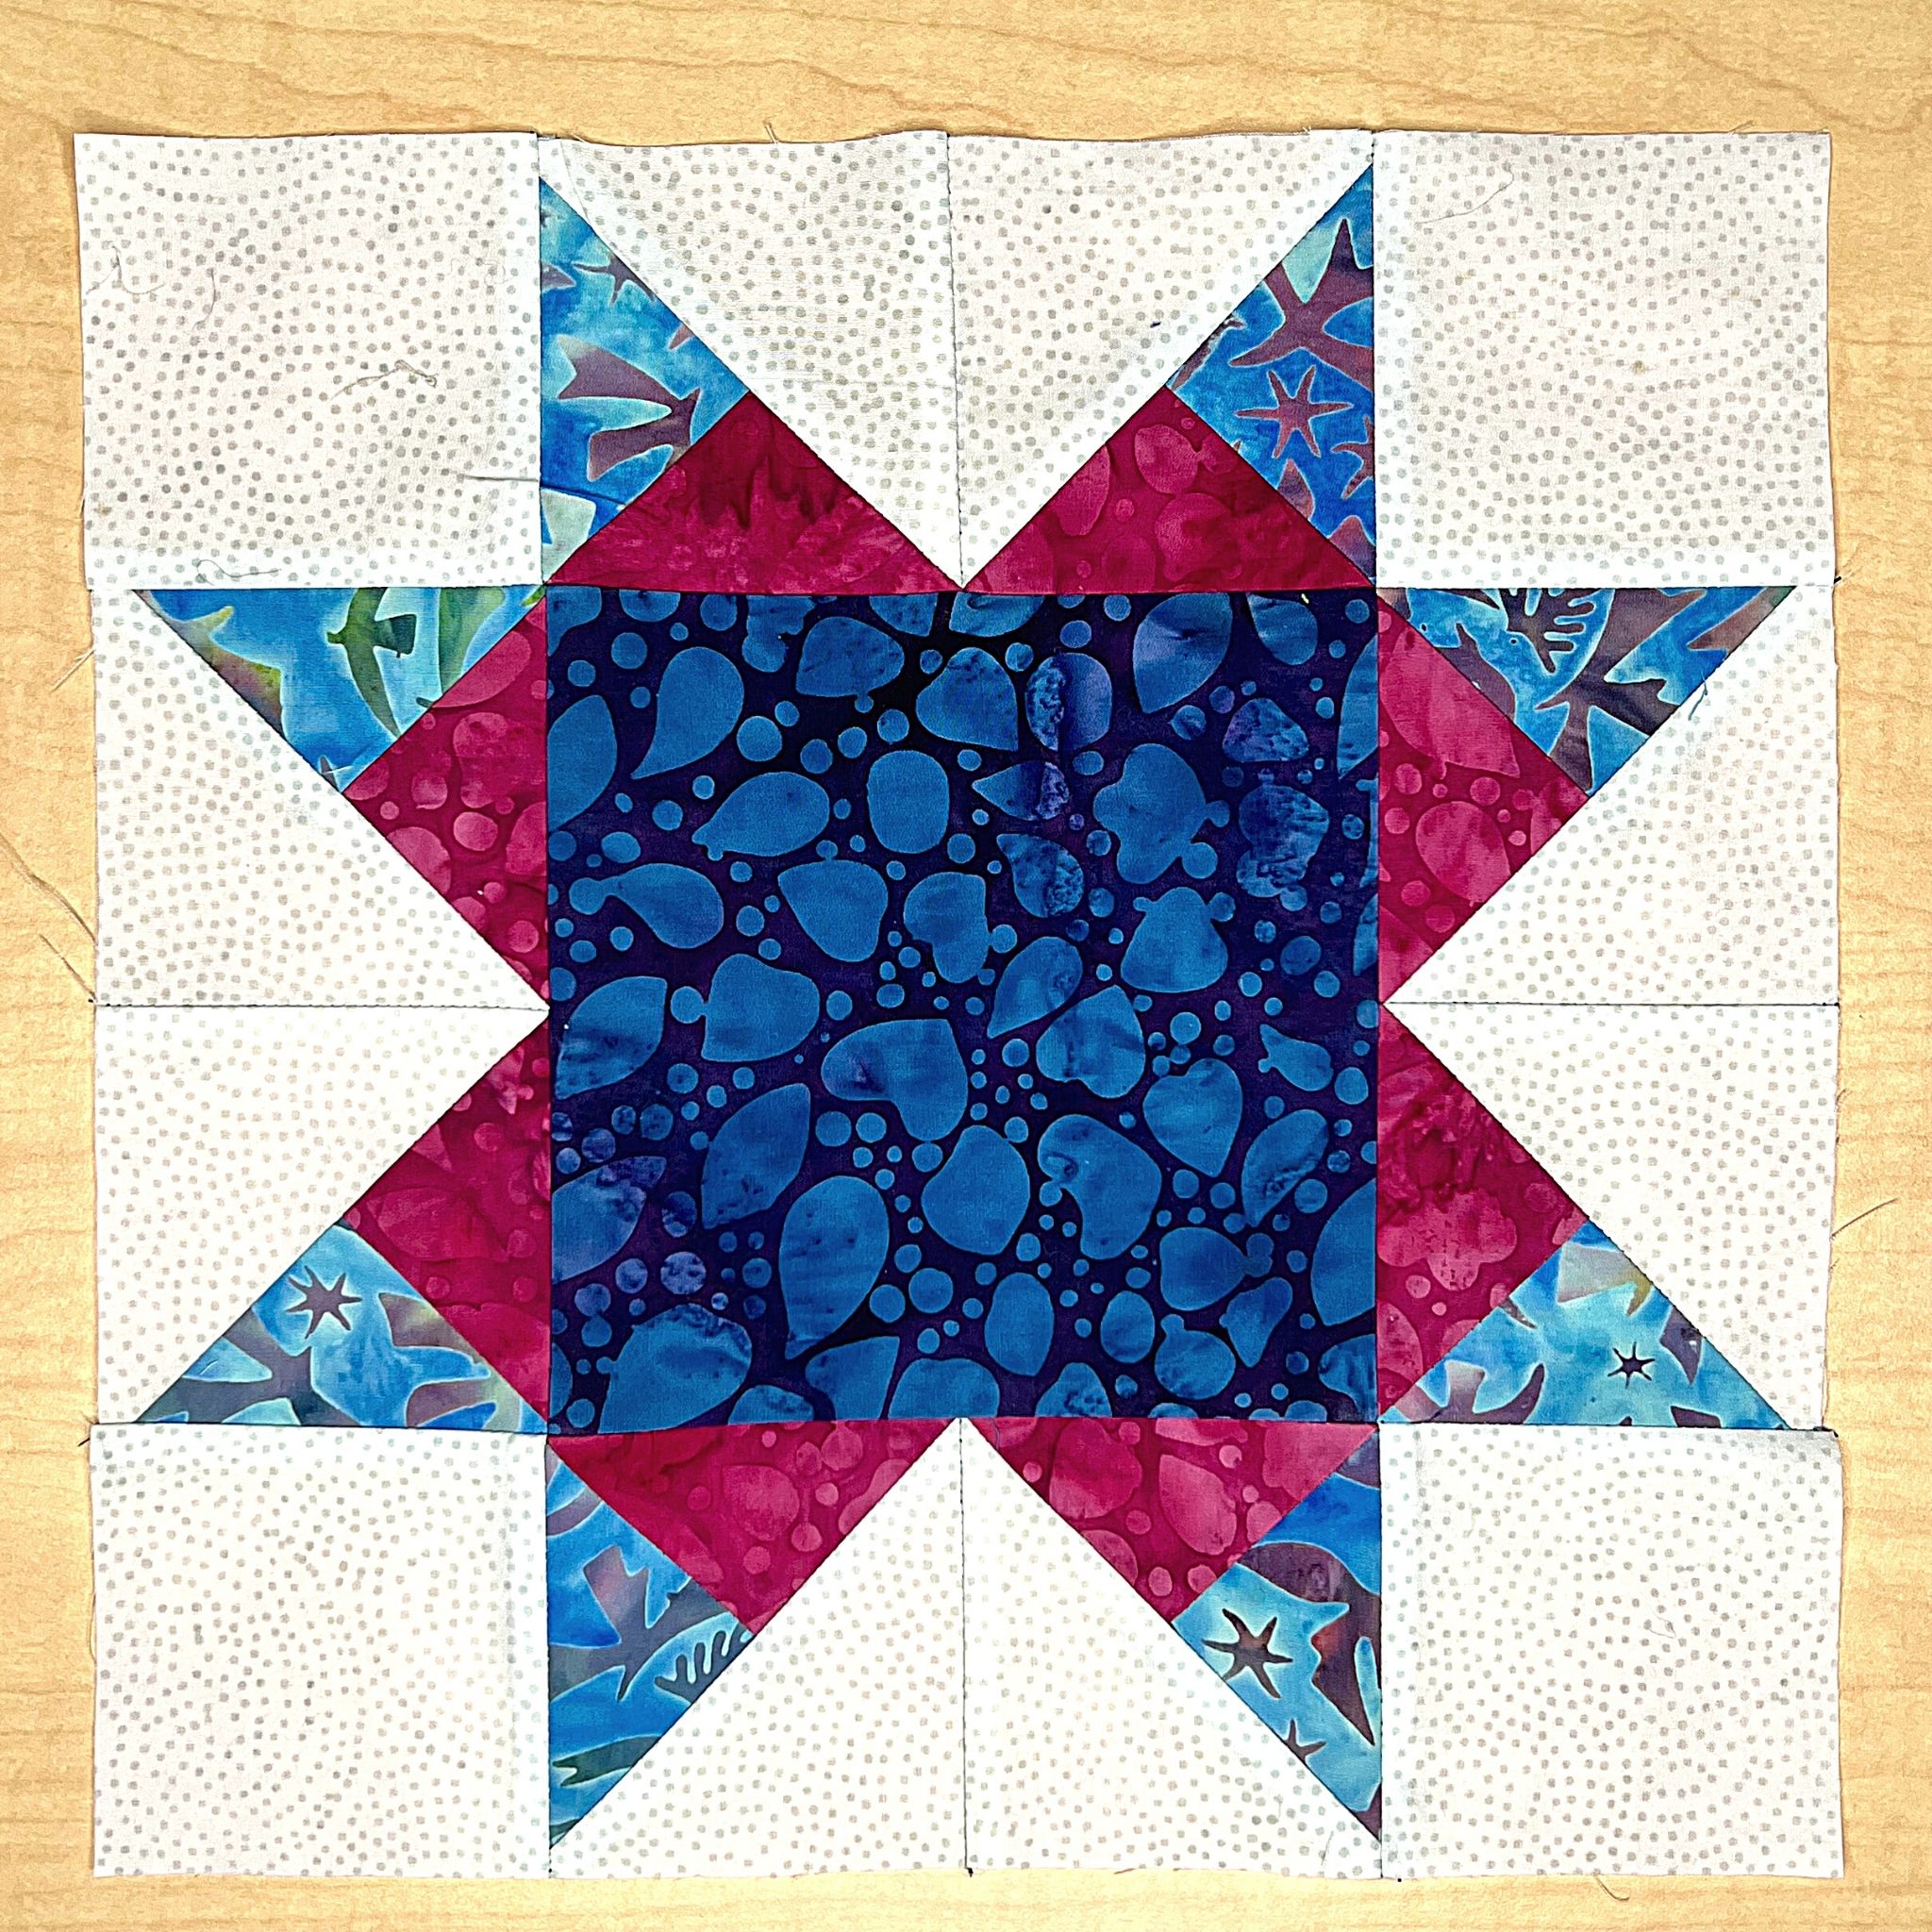 16 12-Inch Quilt Block Patterns to Make for Free - Patchwork Posse